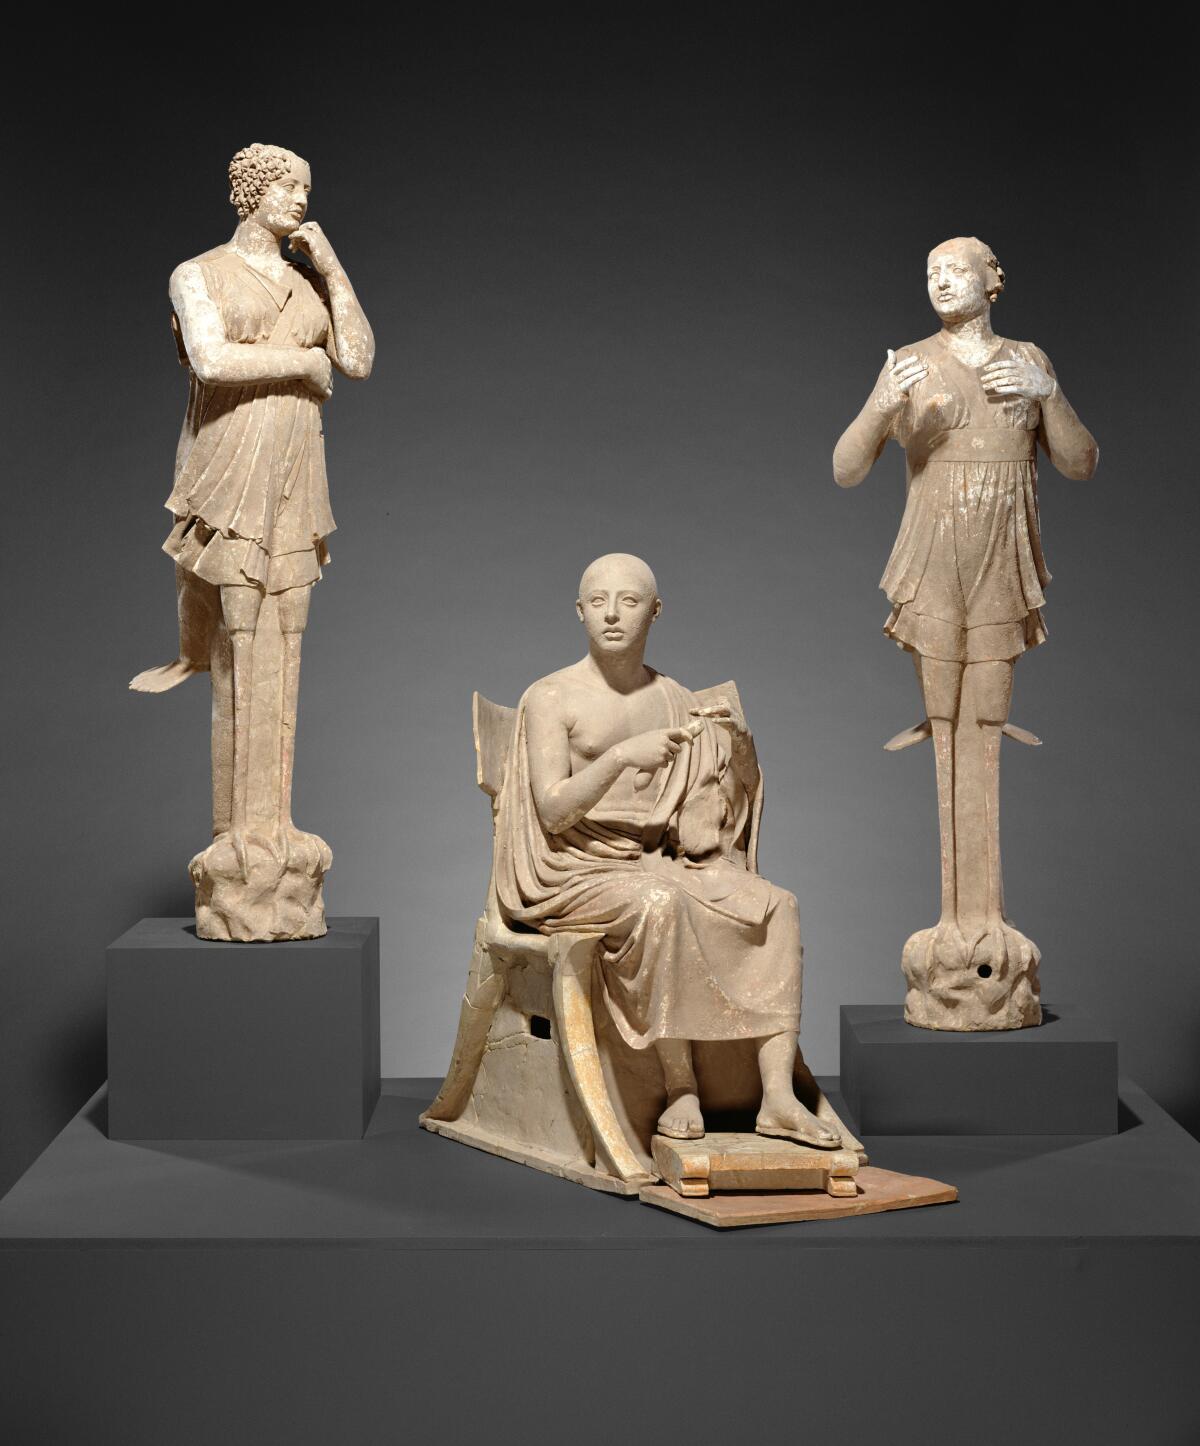 A sculpture of a seated figure flanked by two sculptures of standing figures